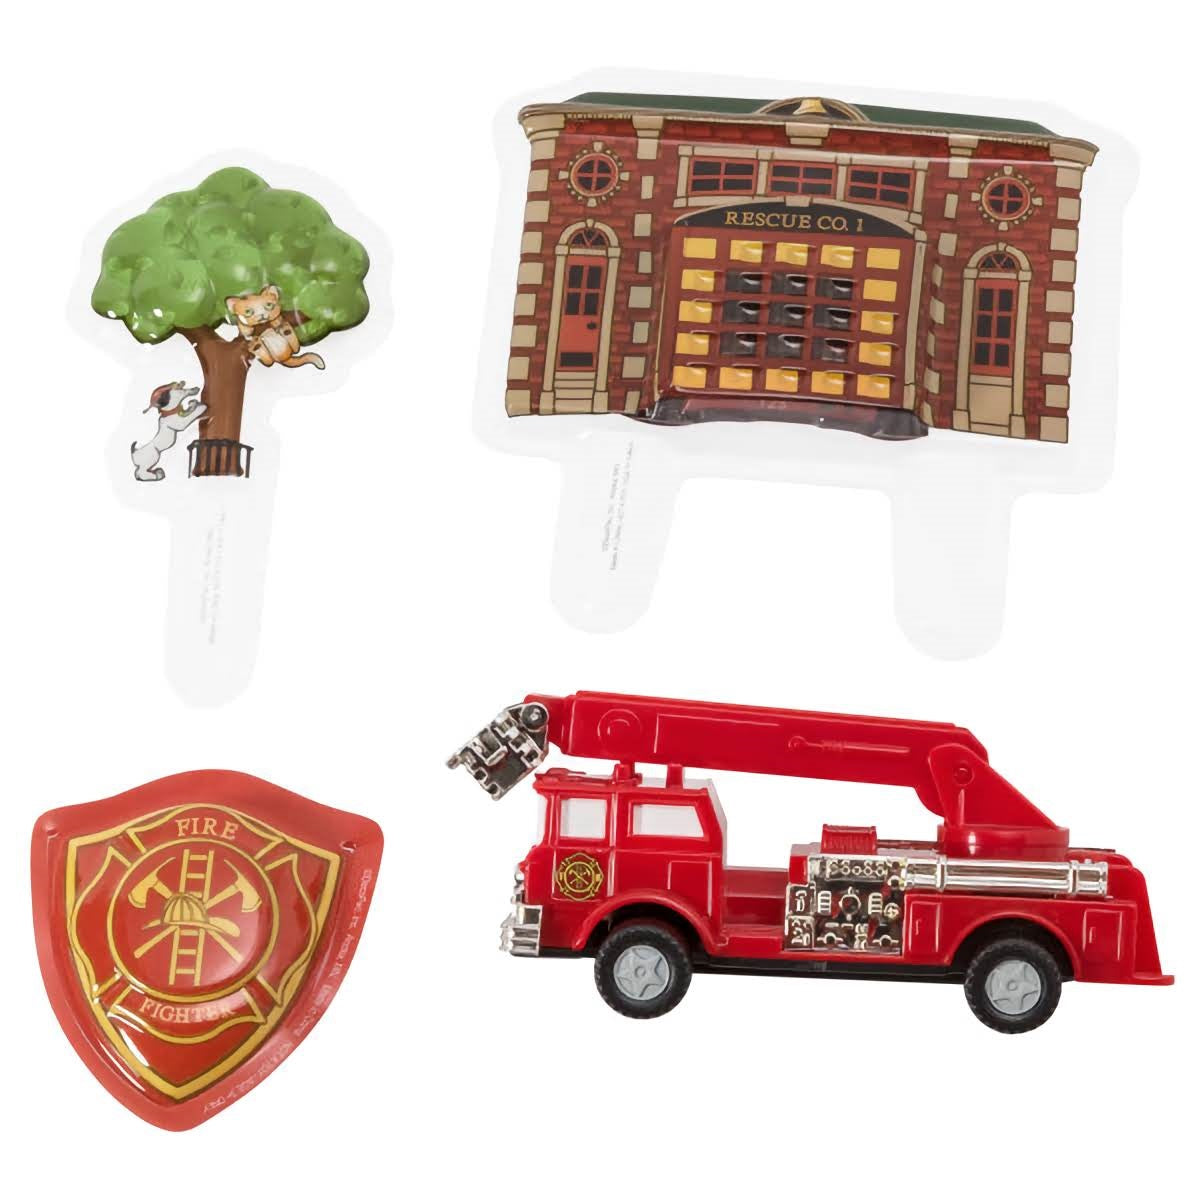 Fire and Rescue cake topper kit, including a firetruck, fire station, shield, and a tree with a cat and dog, for thematic birthday cakes or community service celebration desserts.